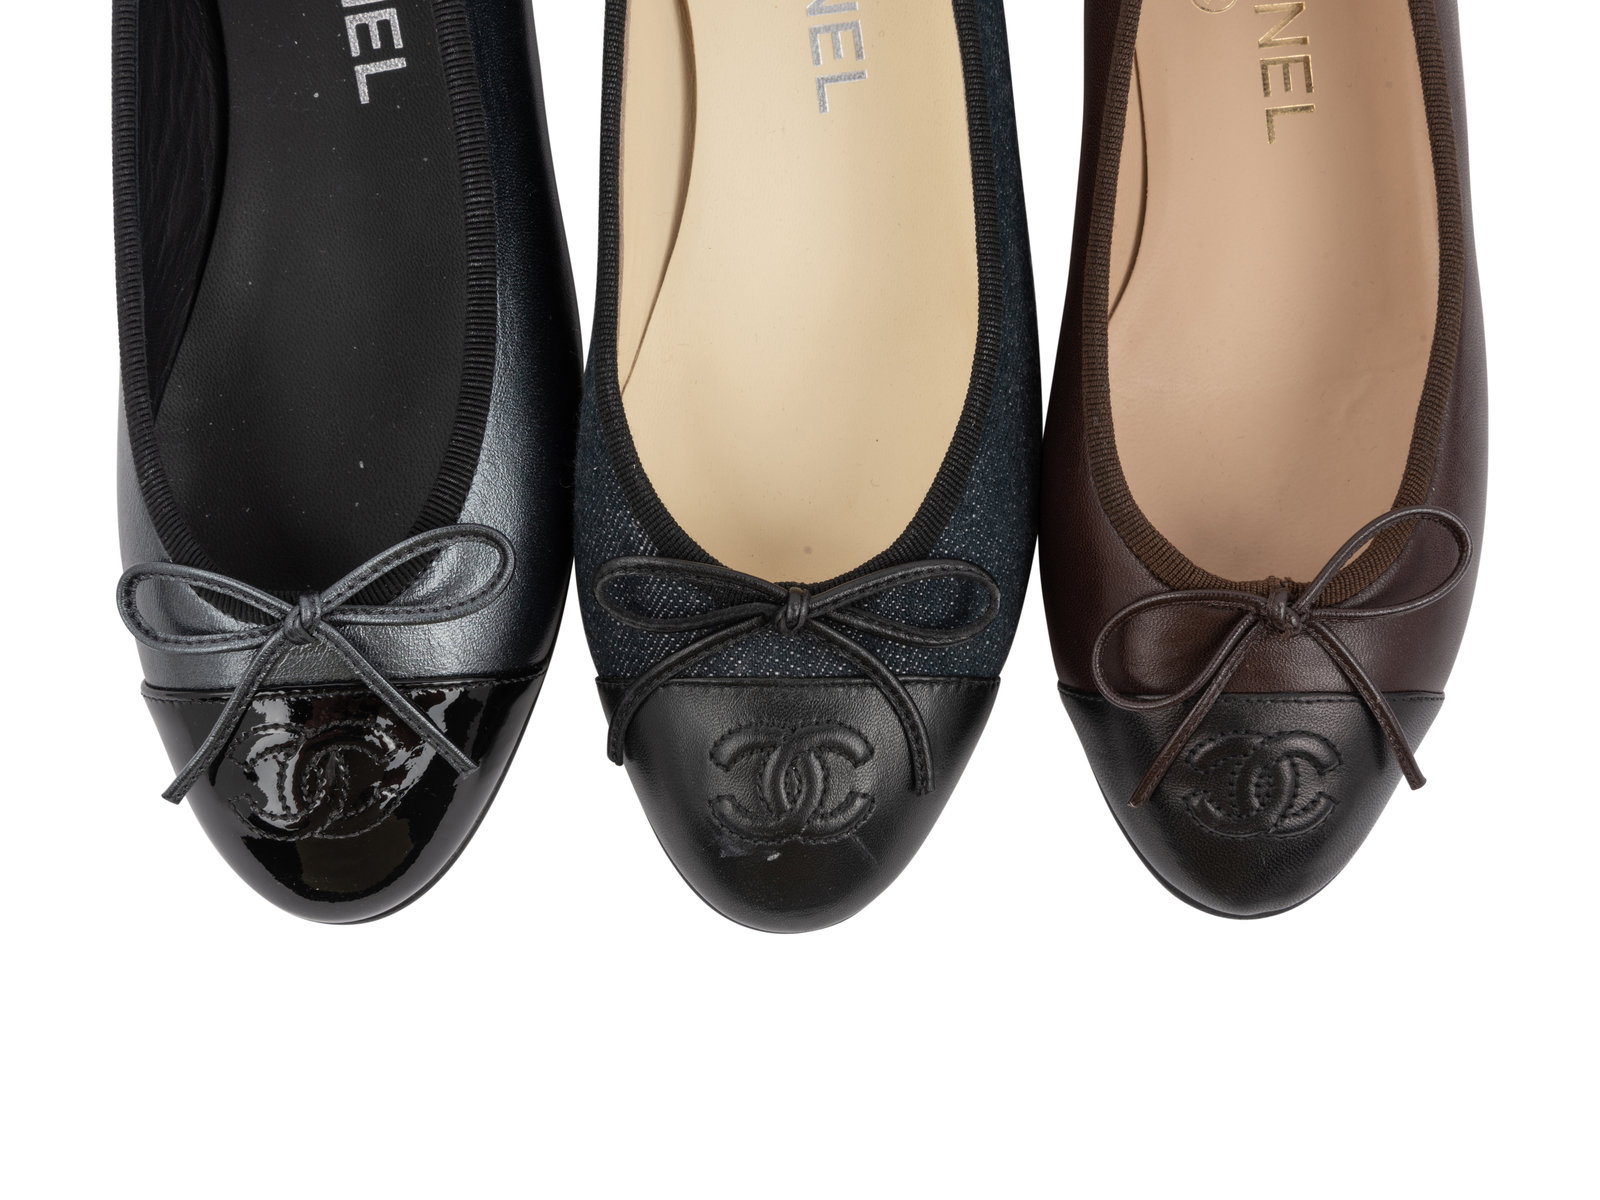 Three Pairs of Chanel Shoes